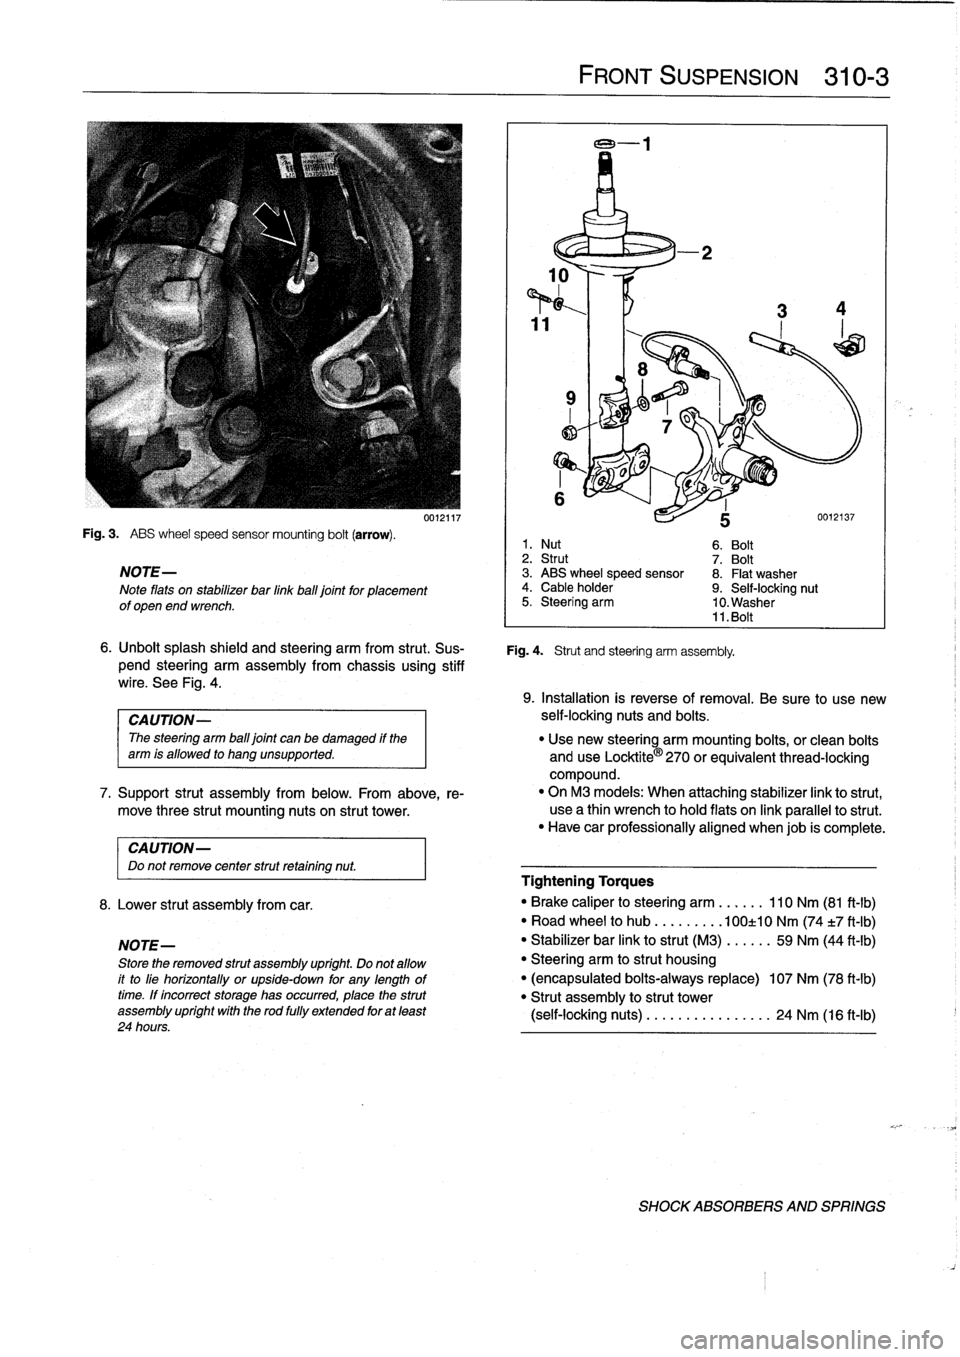 BMW 318i 1997 E36 User Guide 
Fig
.
3
.

	

ABS
wheel
speed
sensor
mounting
bolt
(arrow)
.

NOTE-

Note
flats
on
stabilizer
bar
linkball
joint
for
placement
of
open
end
wrench
.

CAUTION-
Do
not
remove
center
strut
retaining
nut
